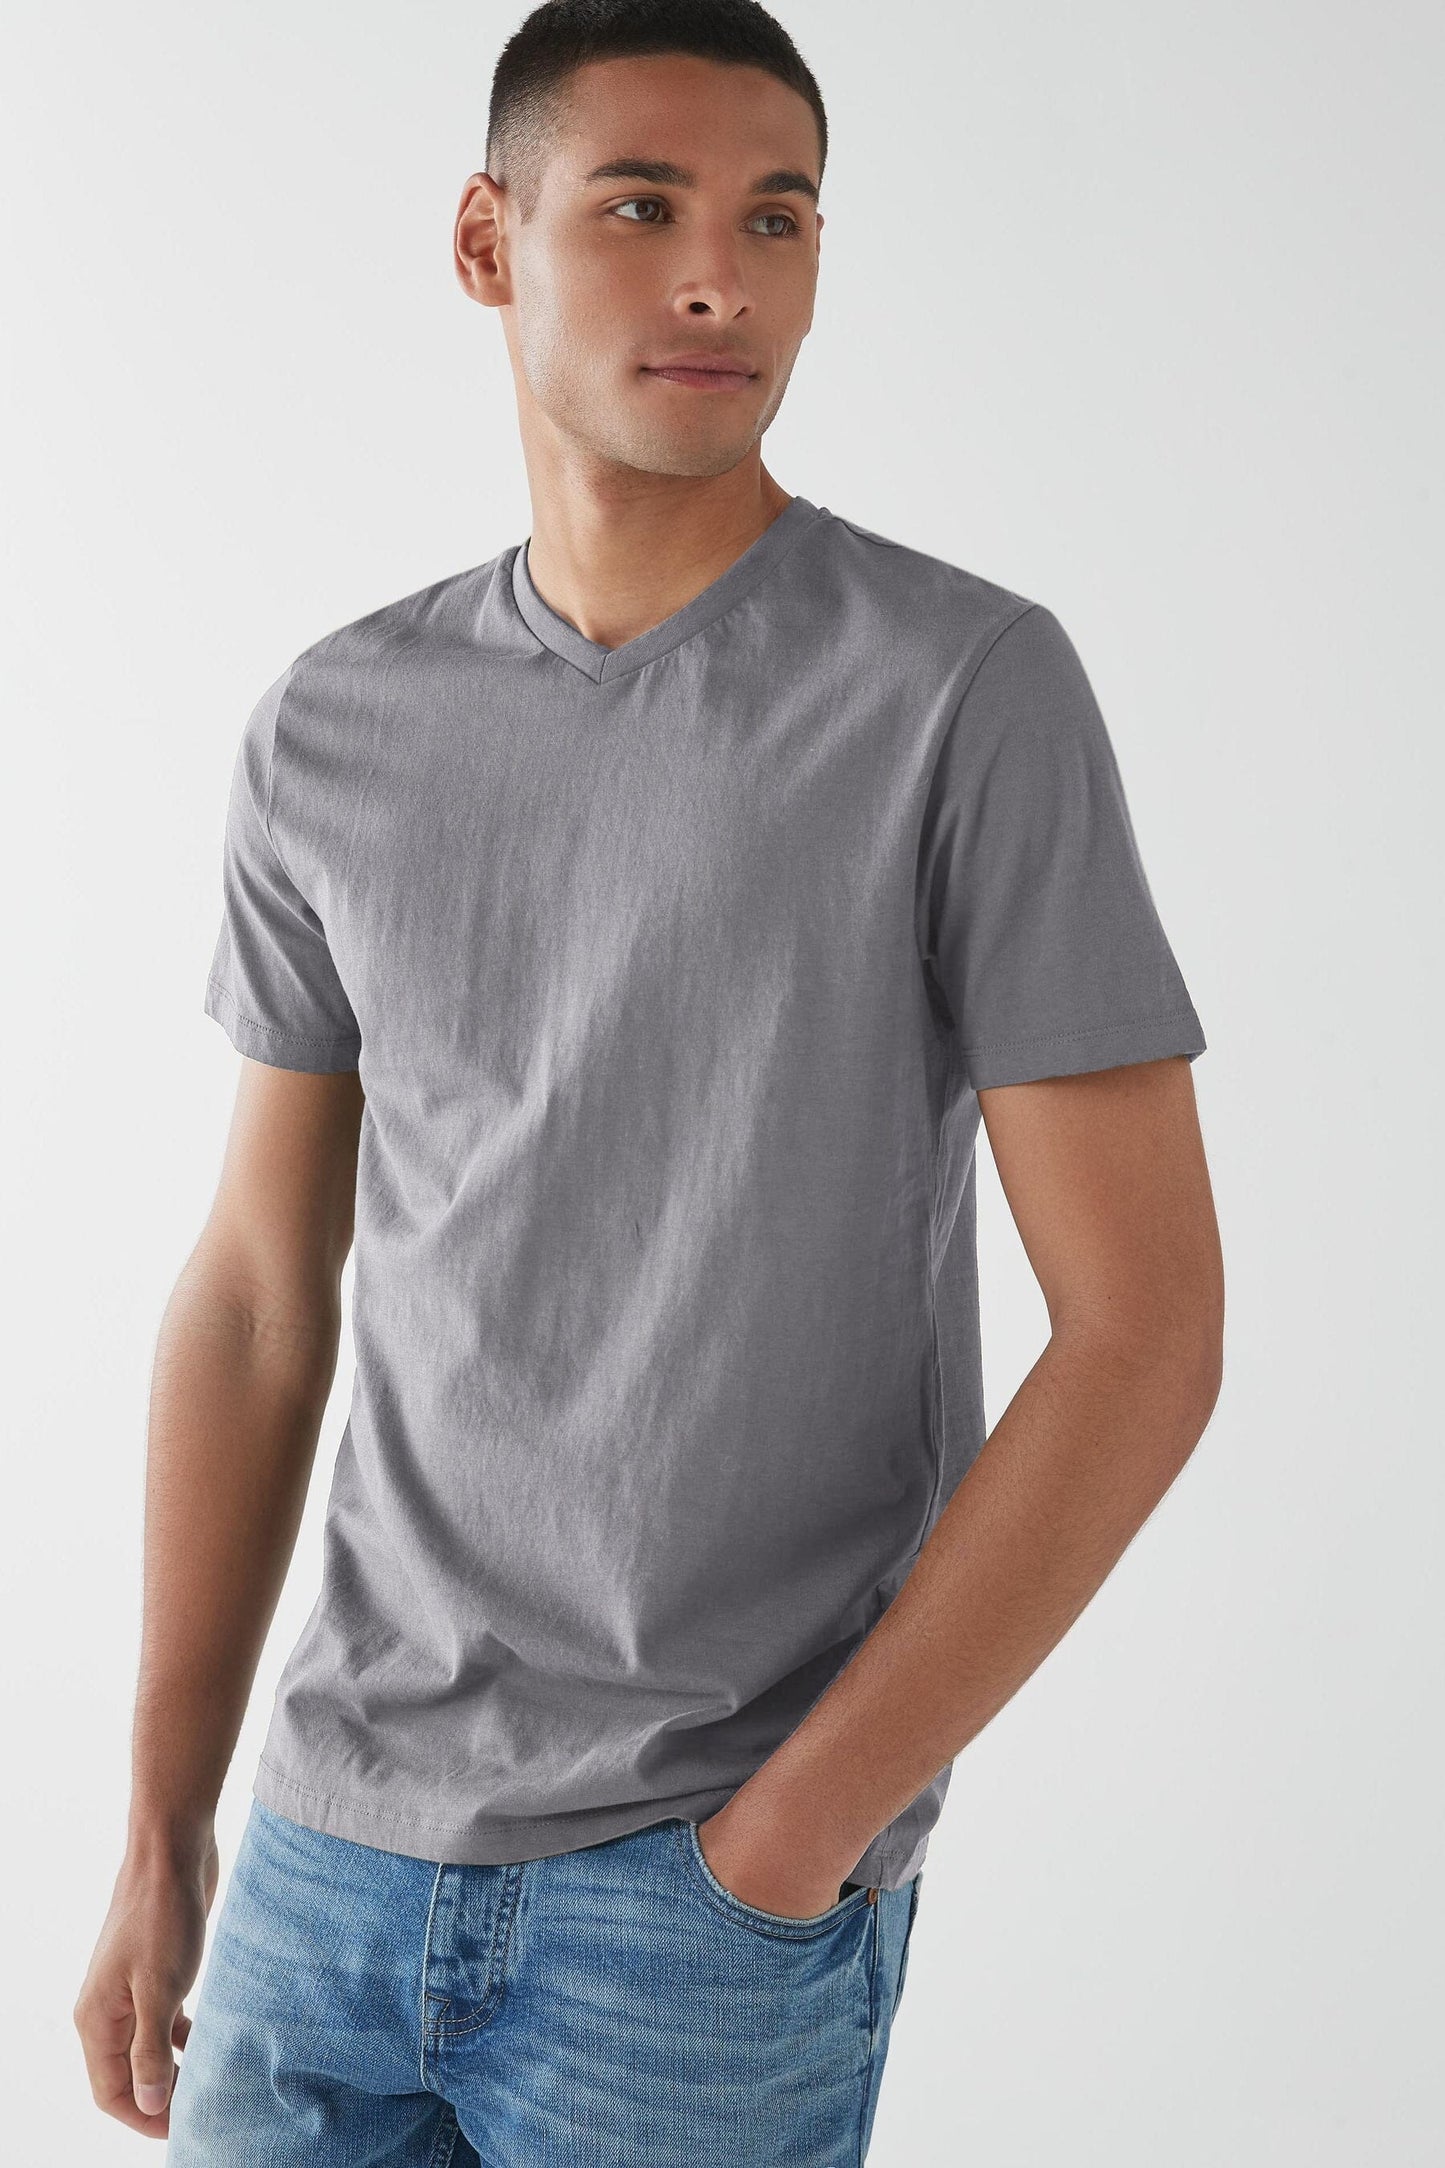 Lower East Men's V-Neck Tee: 100% BCI Combed Cotton Elegance Men's Tee Shirt Image Stone Grey 2XL 